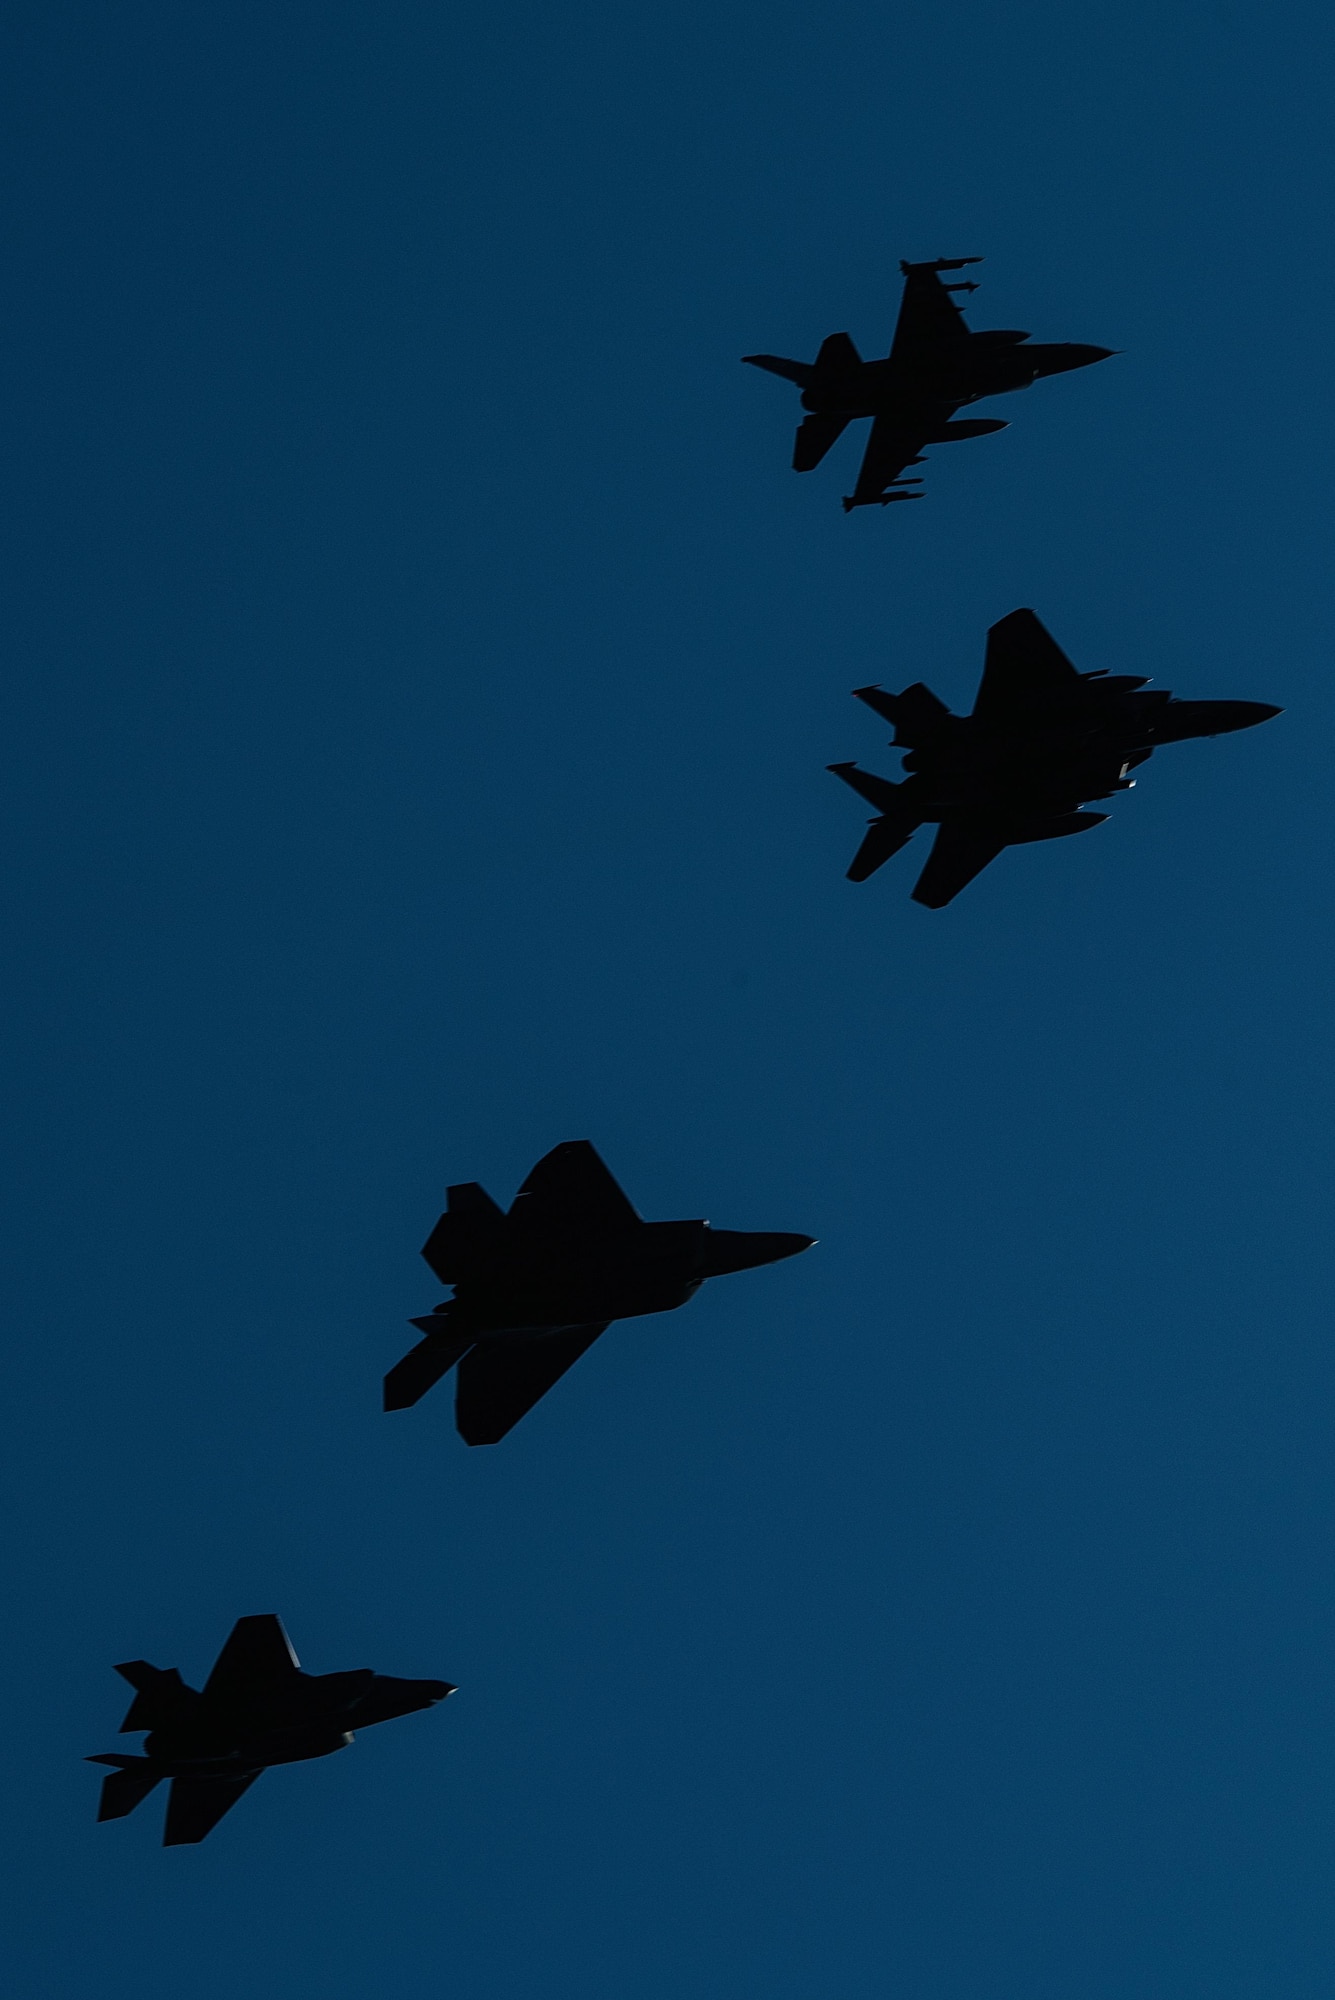 Capt. Skyler Collins and Maj. Caleb Edmondson, 335th Fighter Squadron F-15E Strike Eagle pilot and weapons system officer, fly a practice route, Jan. 19, 2017, over the skies of Seymour Johnson Air Force Base, North Carolina, in preparation for the official fly-over of the 58th Presidential Inauguration. The 335th FS F-15E Strike Eagle will fly in a four-ship formation alongside a 94th FS F-22 Raptor from Langley AFB, Virginia; a 58th FS F-35 Lightning II from Eglin AFB, Florida; and a 55th FS F-16 Fighting Falcon from Shaw AFB, South Carolina, during President-Elect Donald Trump’s inauguration ceremony in Washington, Jan. 20, 2017. (U.S. Air Force photo by Airman Shawna L. Keyes)